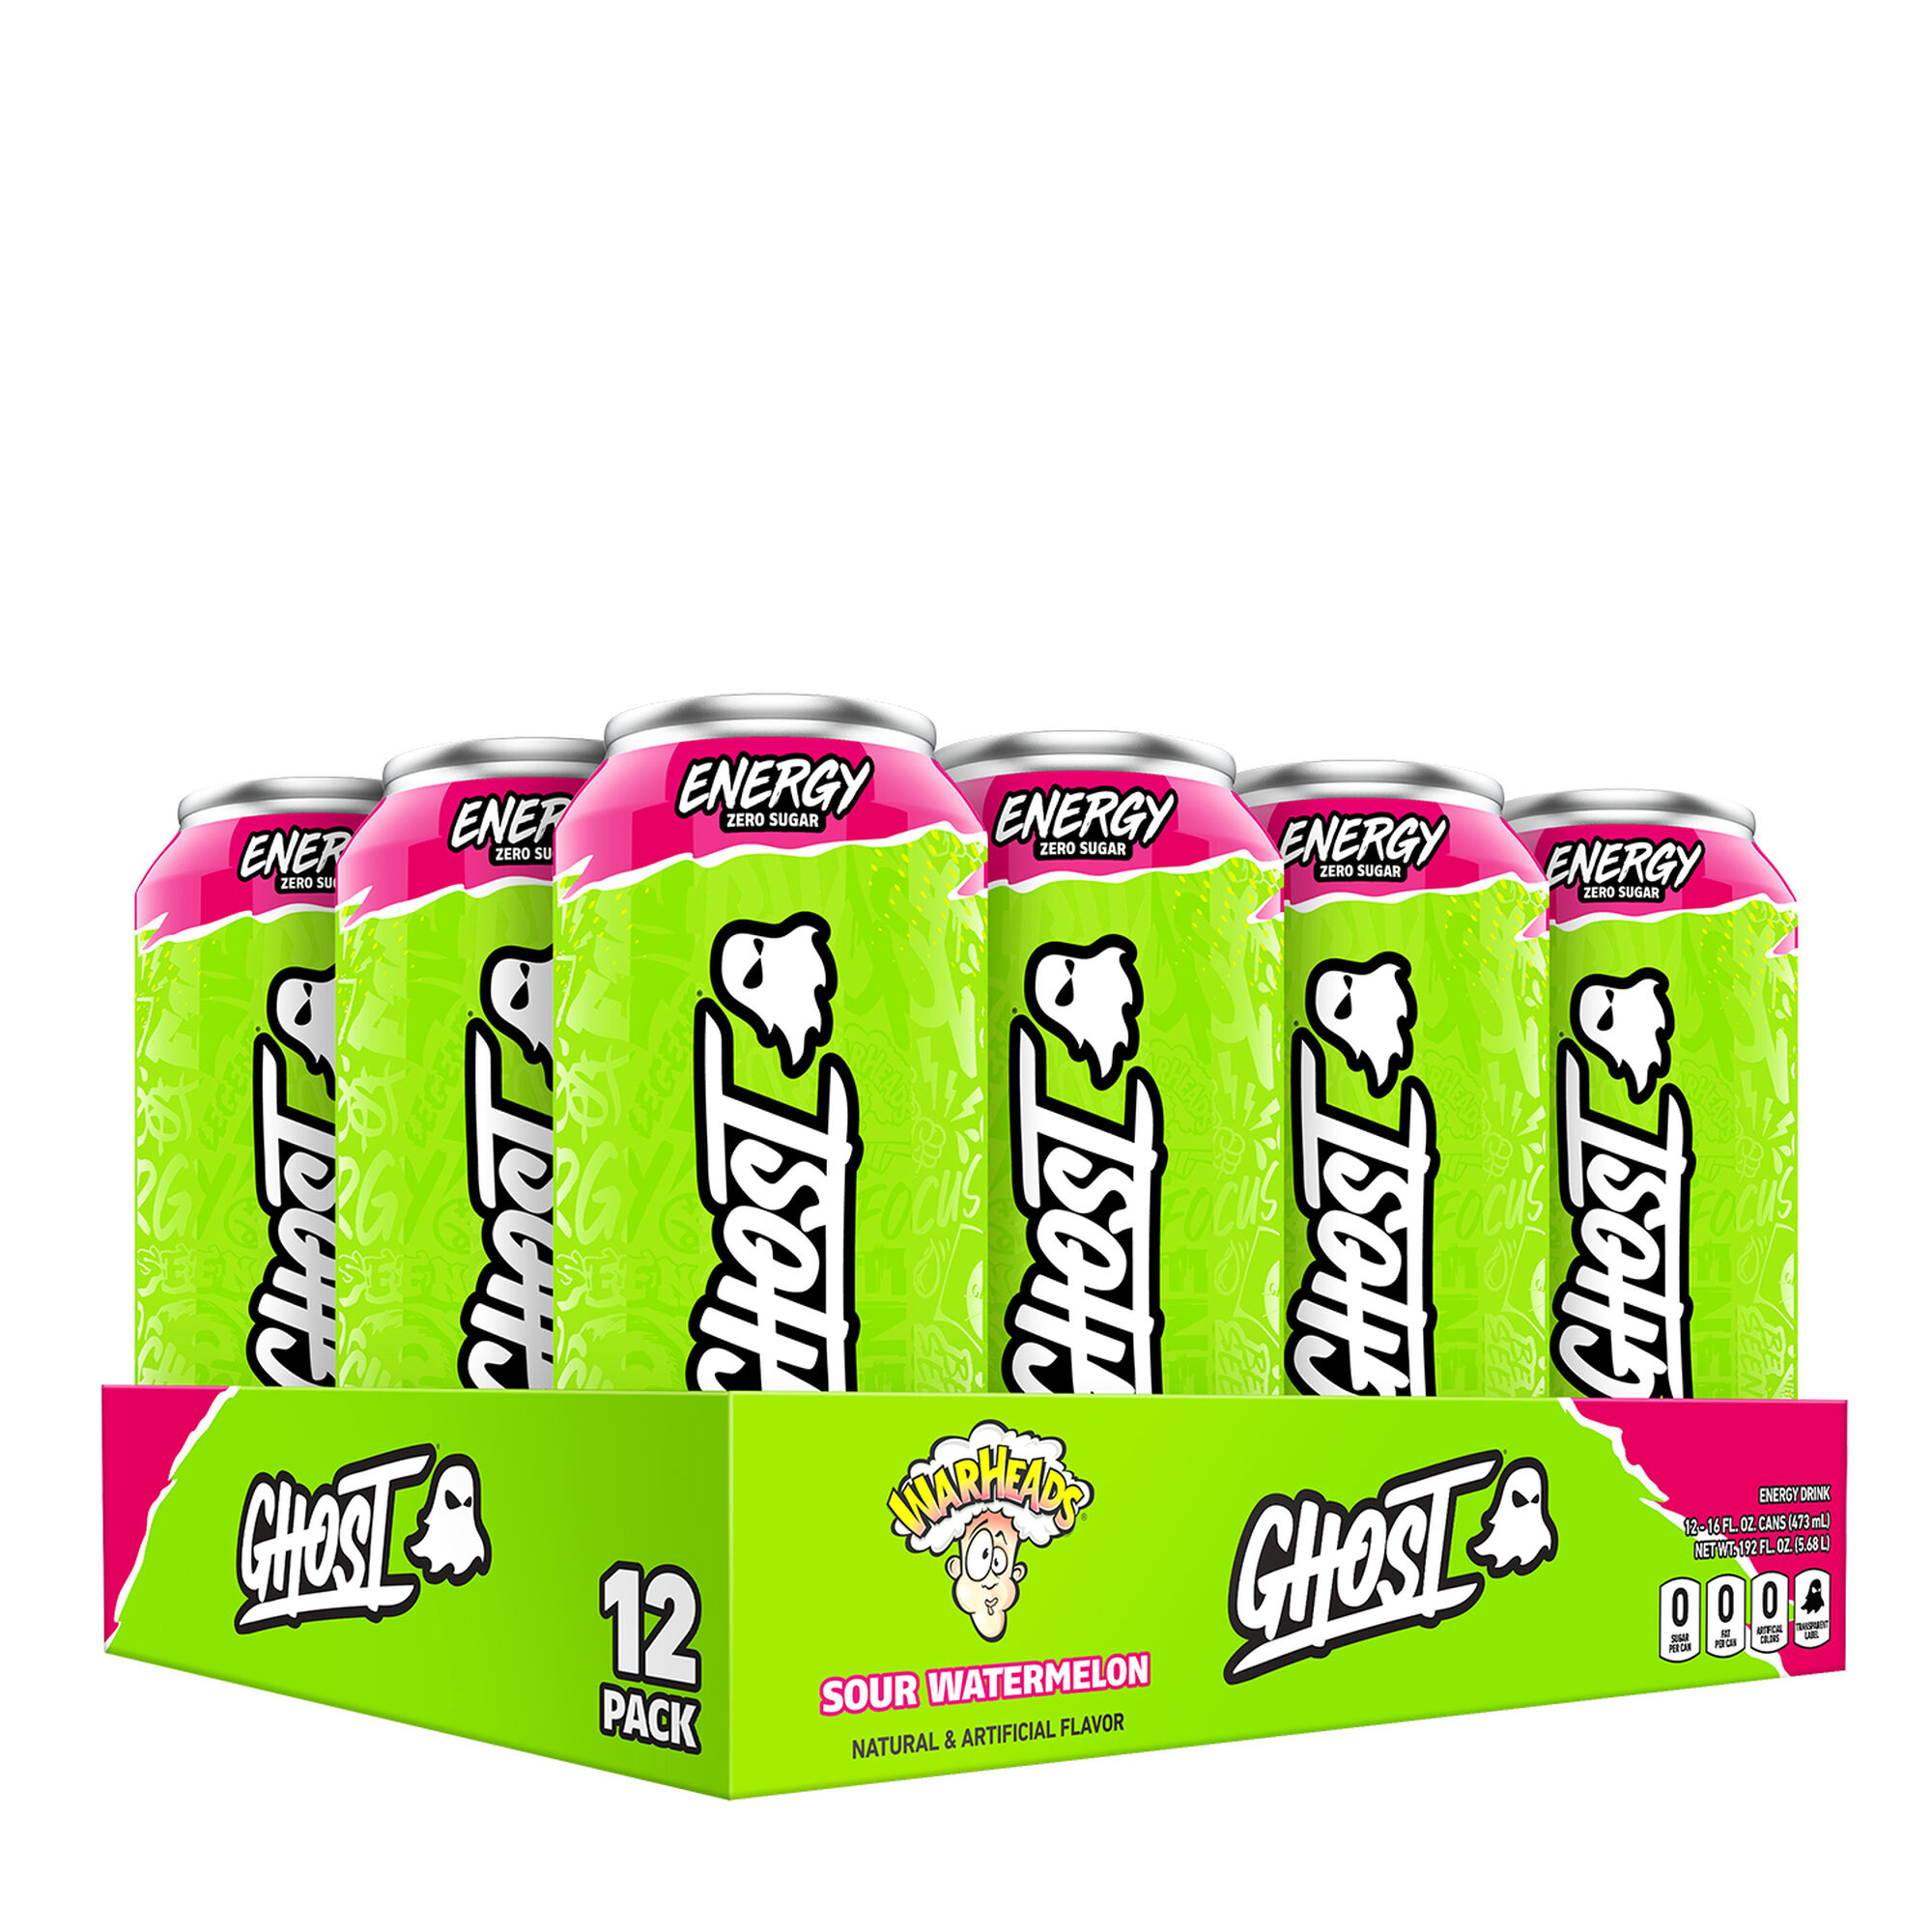 Ghost - ENERGY DRINK-12-Pack-Warheads Sour Watermelon-